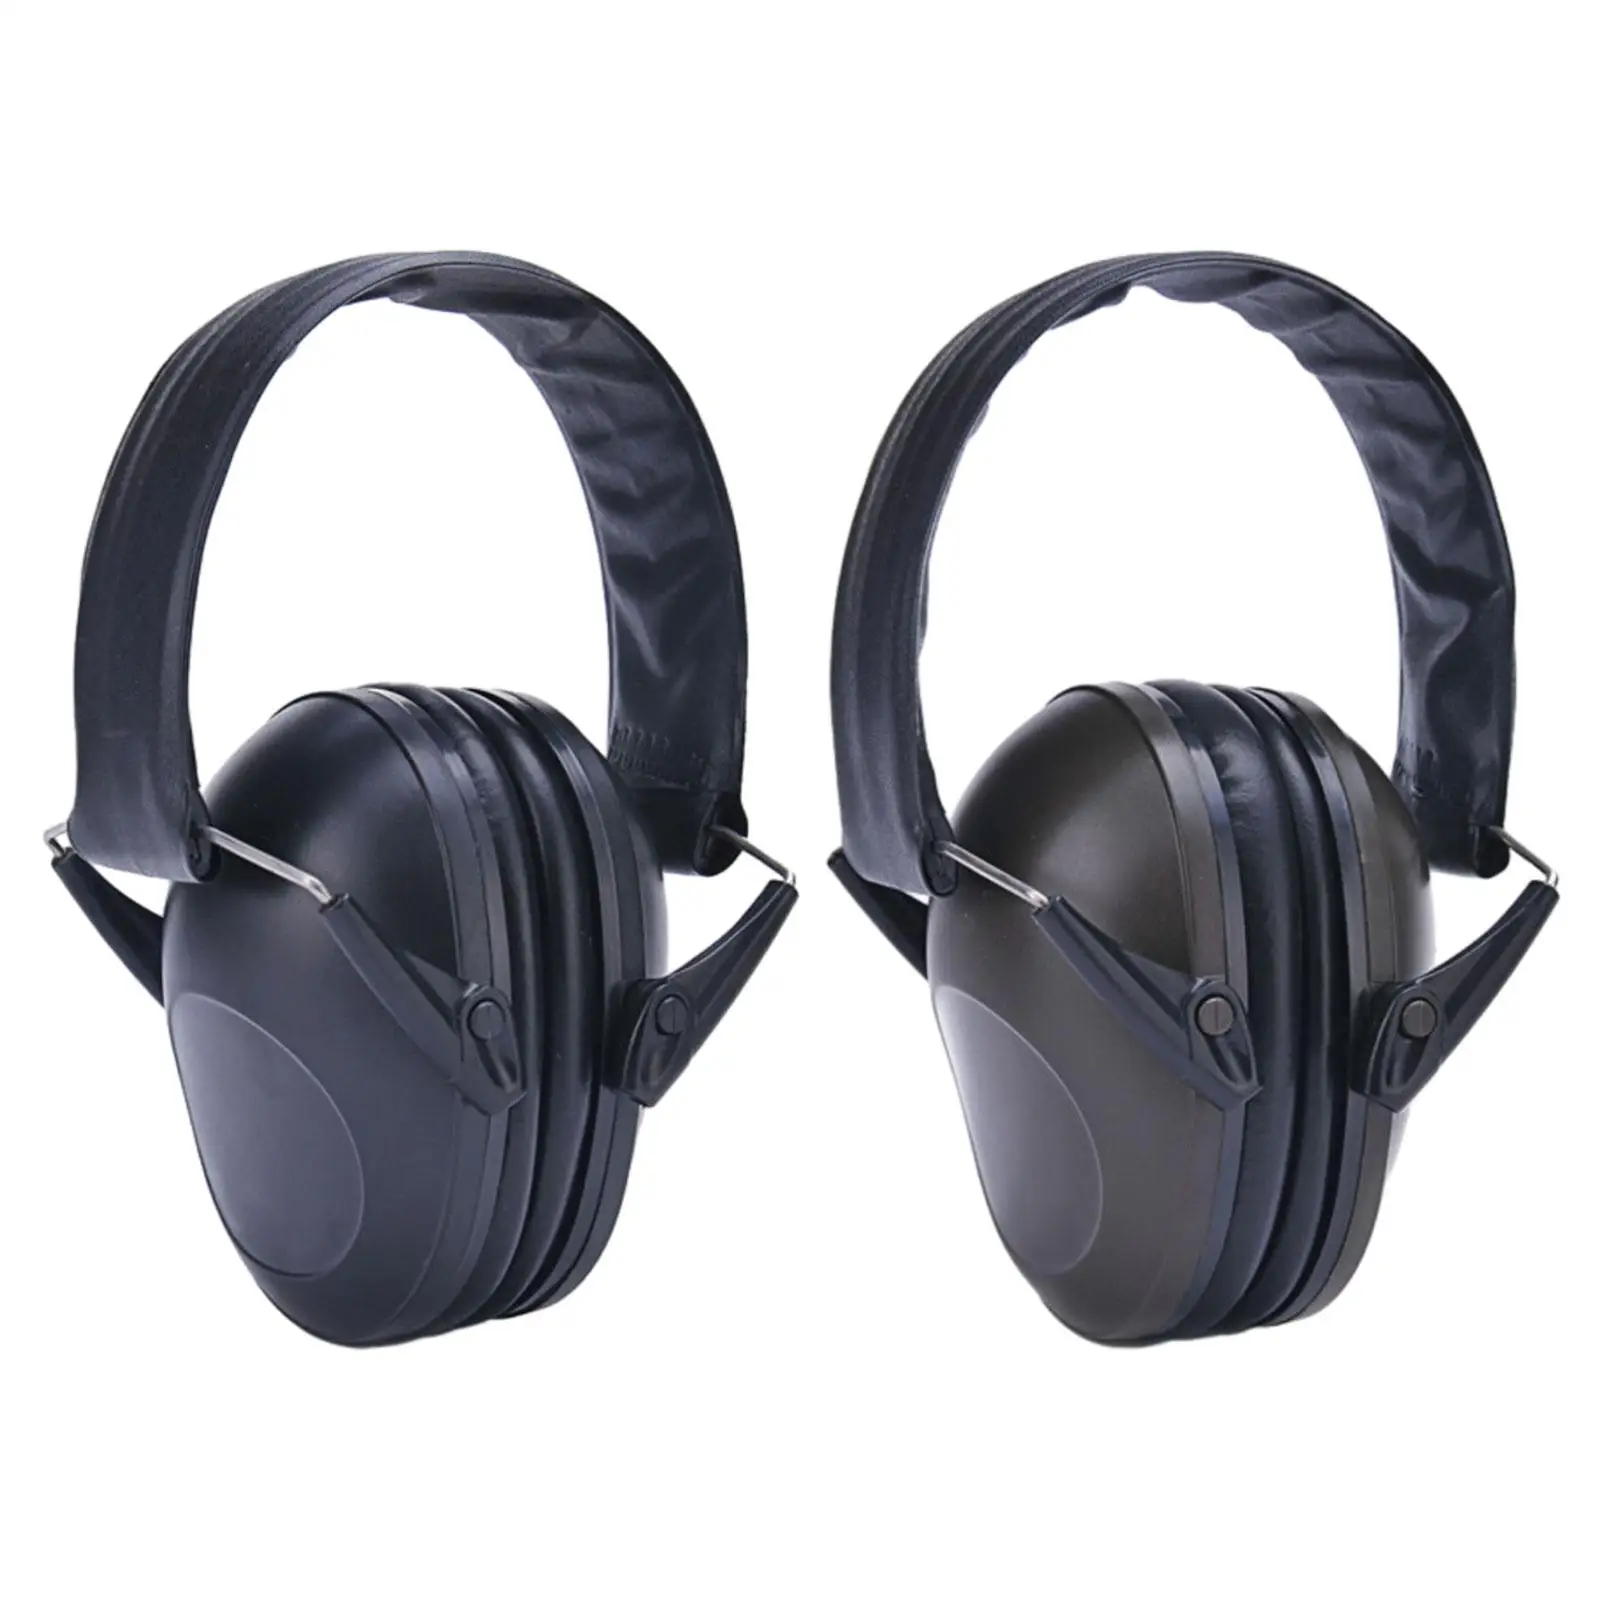 Hearing Protectors Noise Reduction Folding Protective Earmuffs Ear Covers for Studying Construction Sleeping Woodwork Concerts